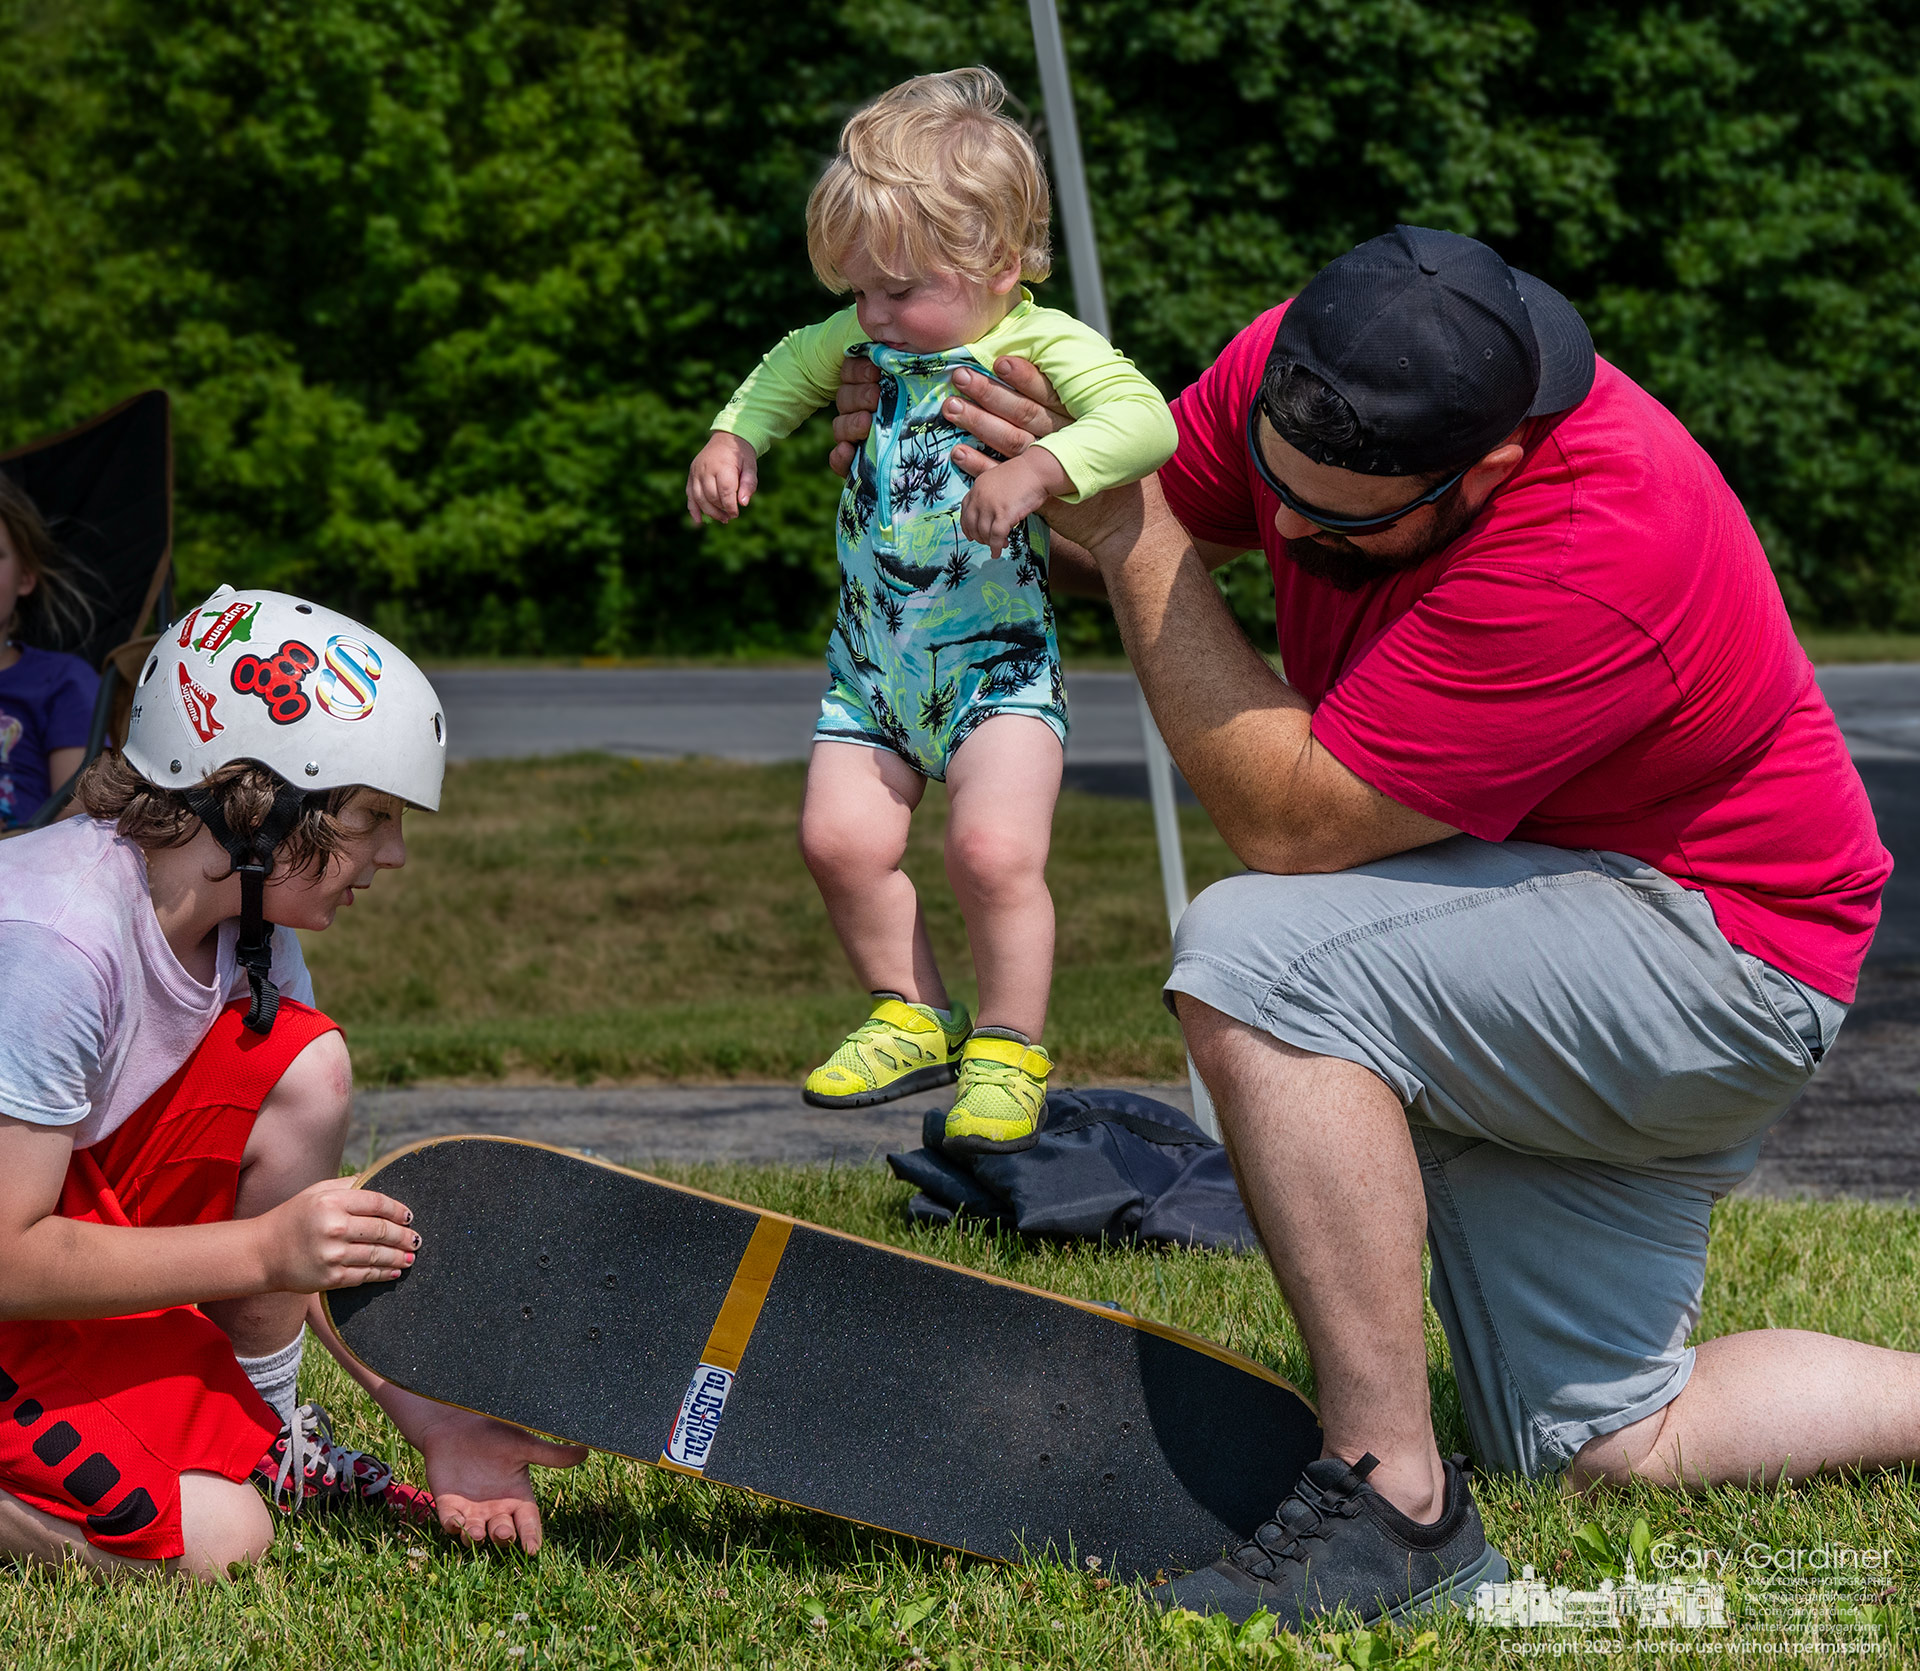 A toddler gets assistance from father and brother to learn a standard skateboarder's trick, the kick-flip, during Old Skool Skateshop's Father/Child skate around and competition Sunday. My Final Photo for June 18, 2023.